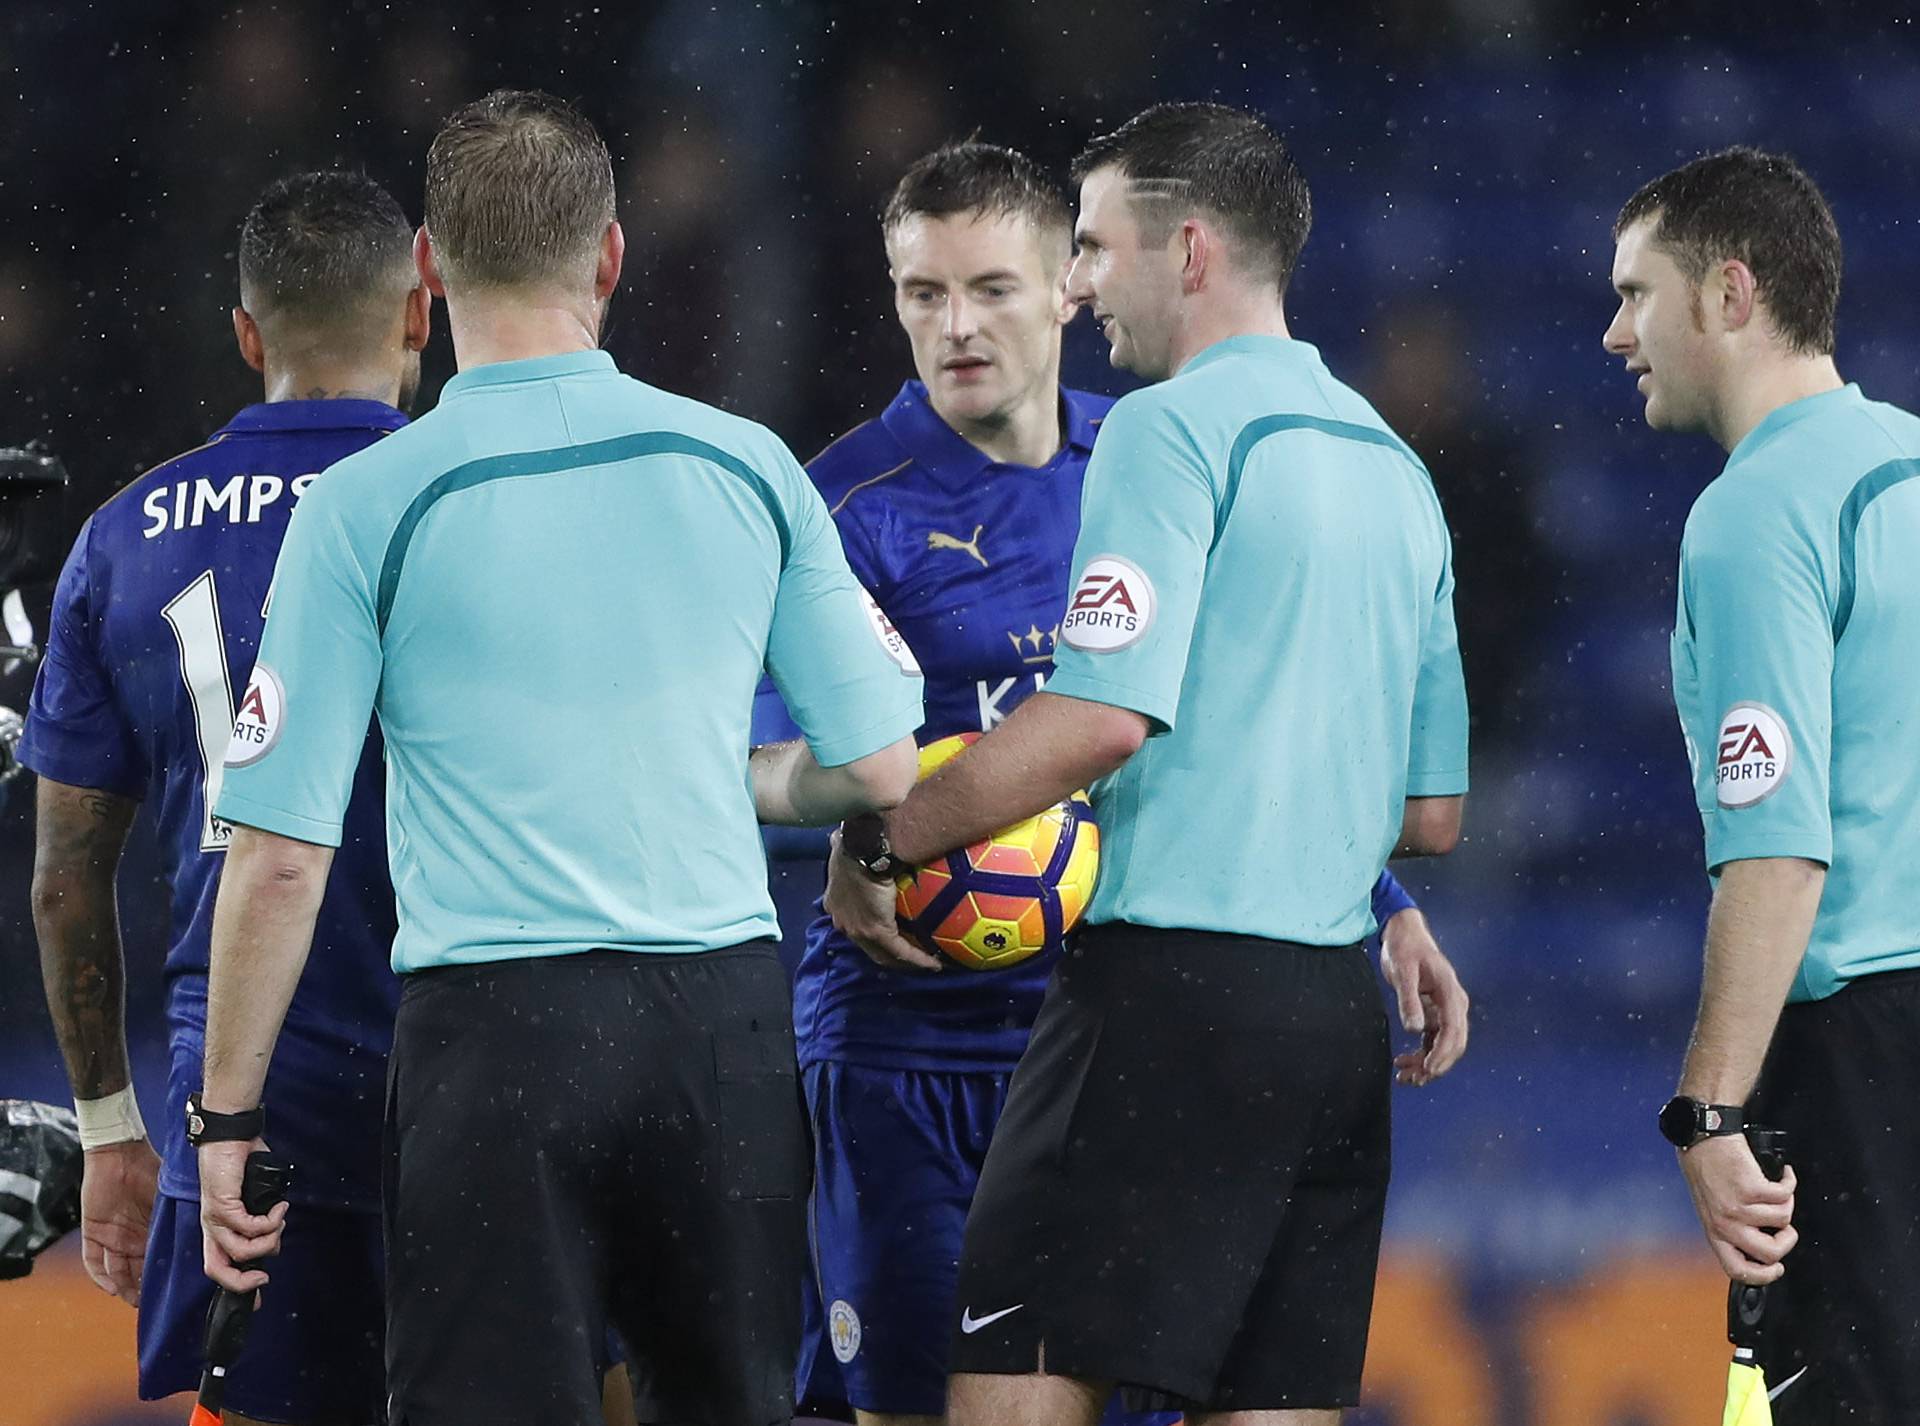 Leicester City's Jamie Vardy collets the match ball from the referee Michael Oliver at the end of the match after scoring a hat-trick